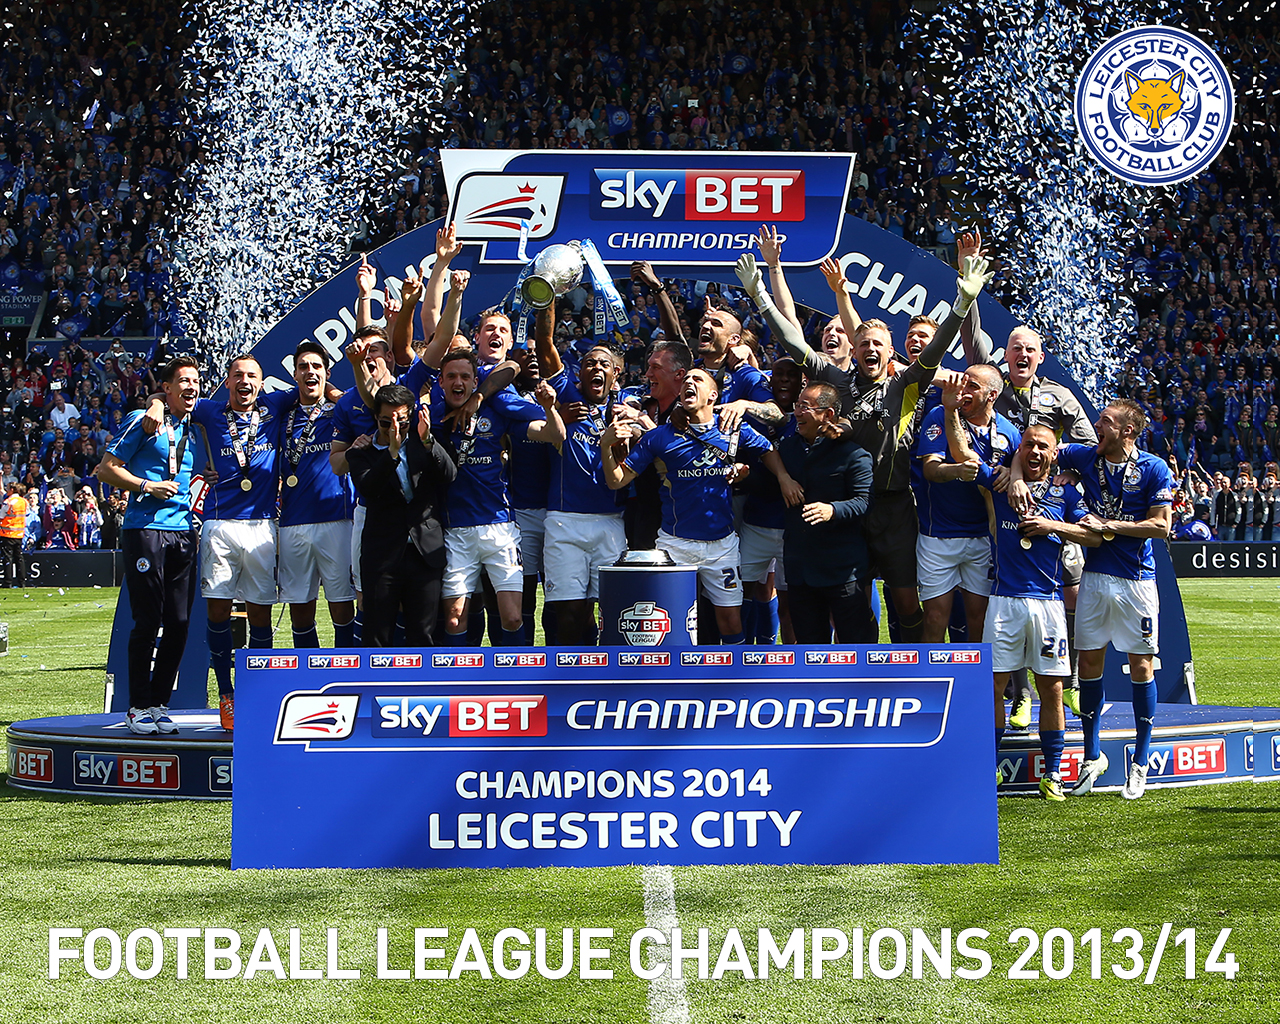 Leicester City - Leicester City Fc Win League - HD Wallpaper 